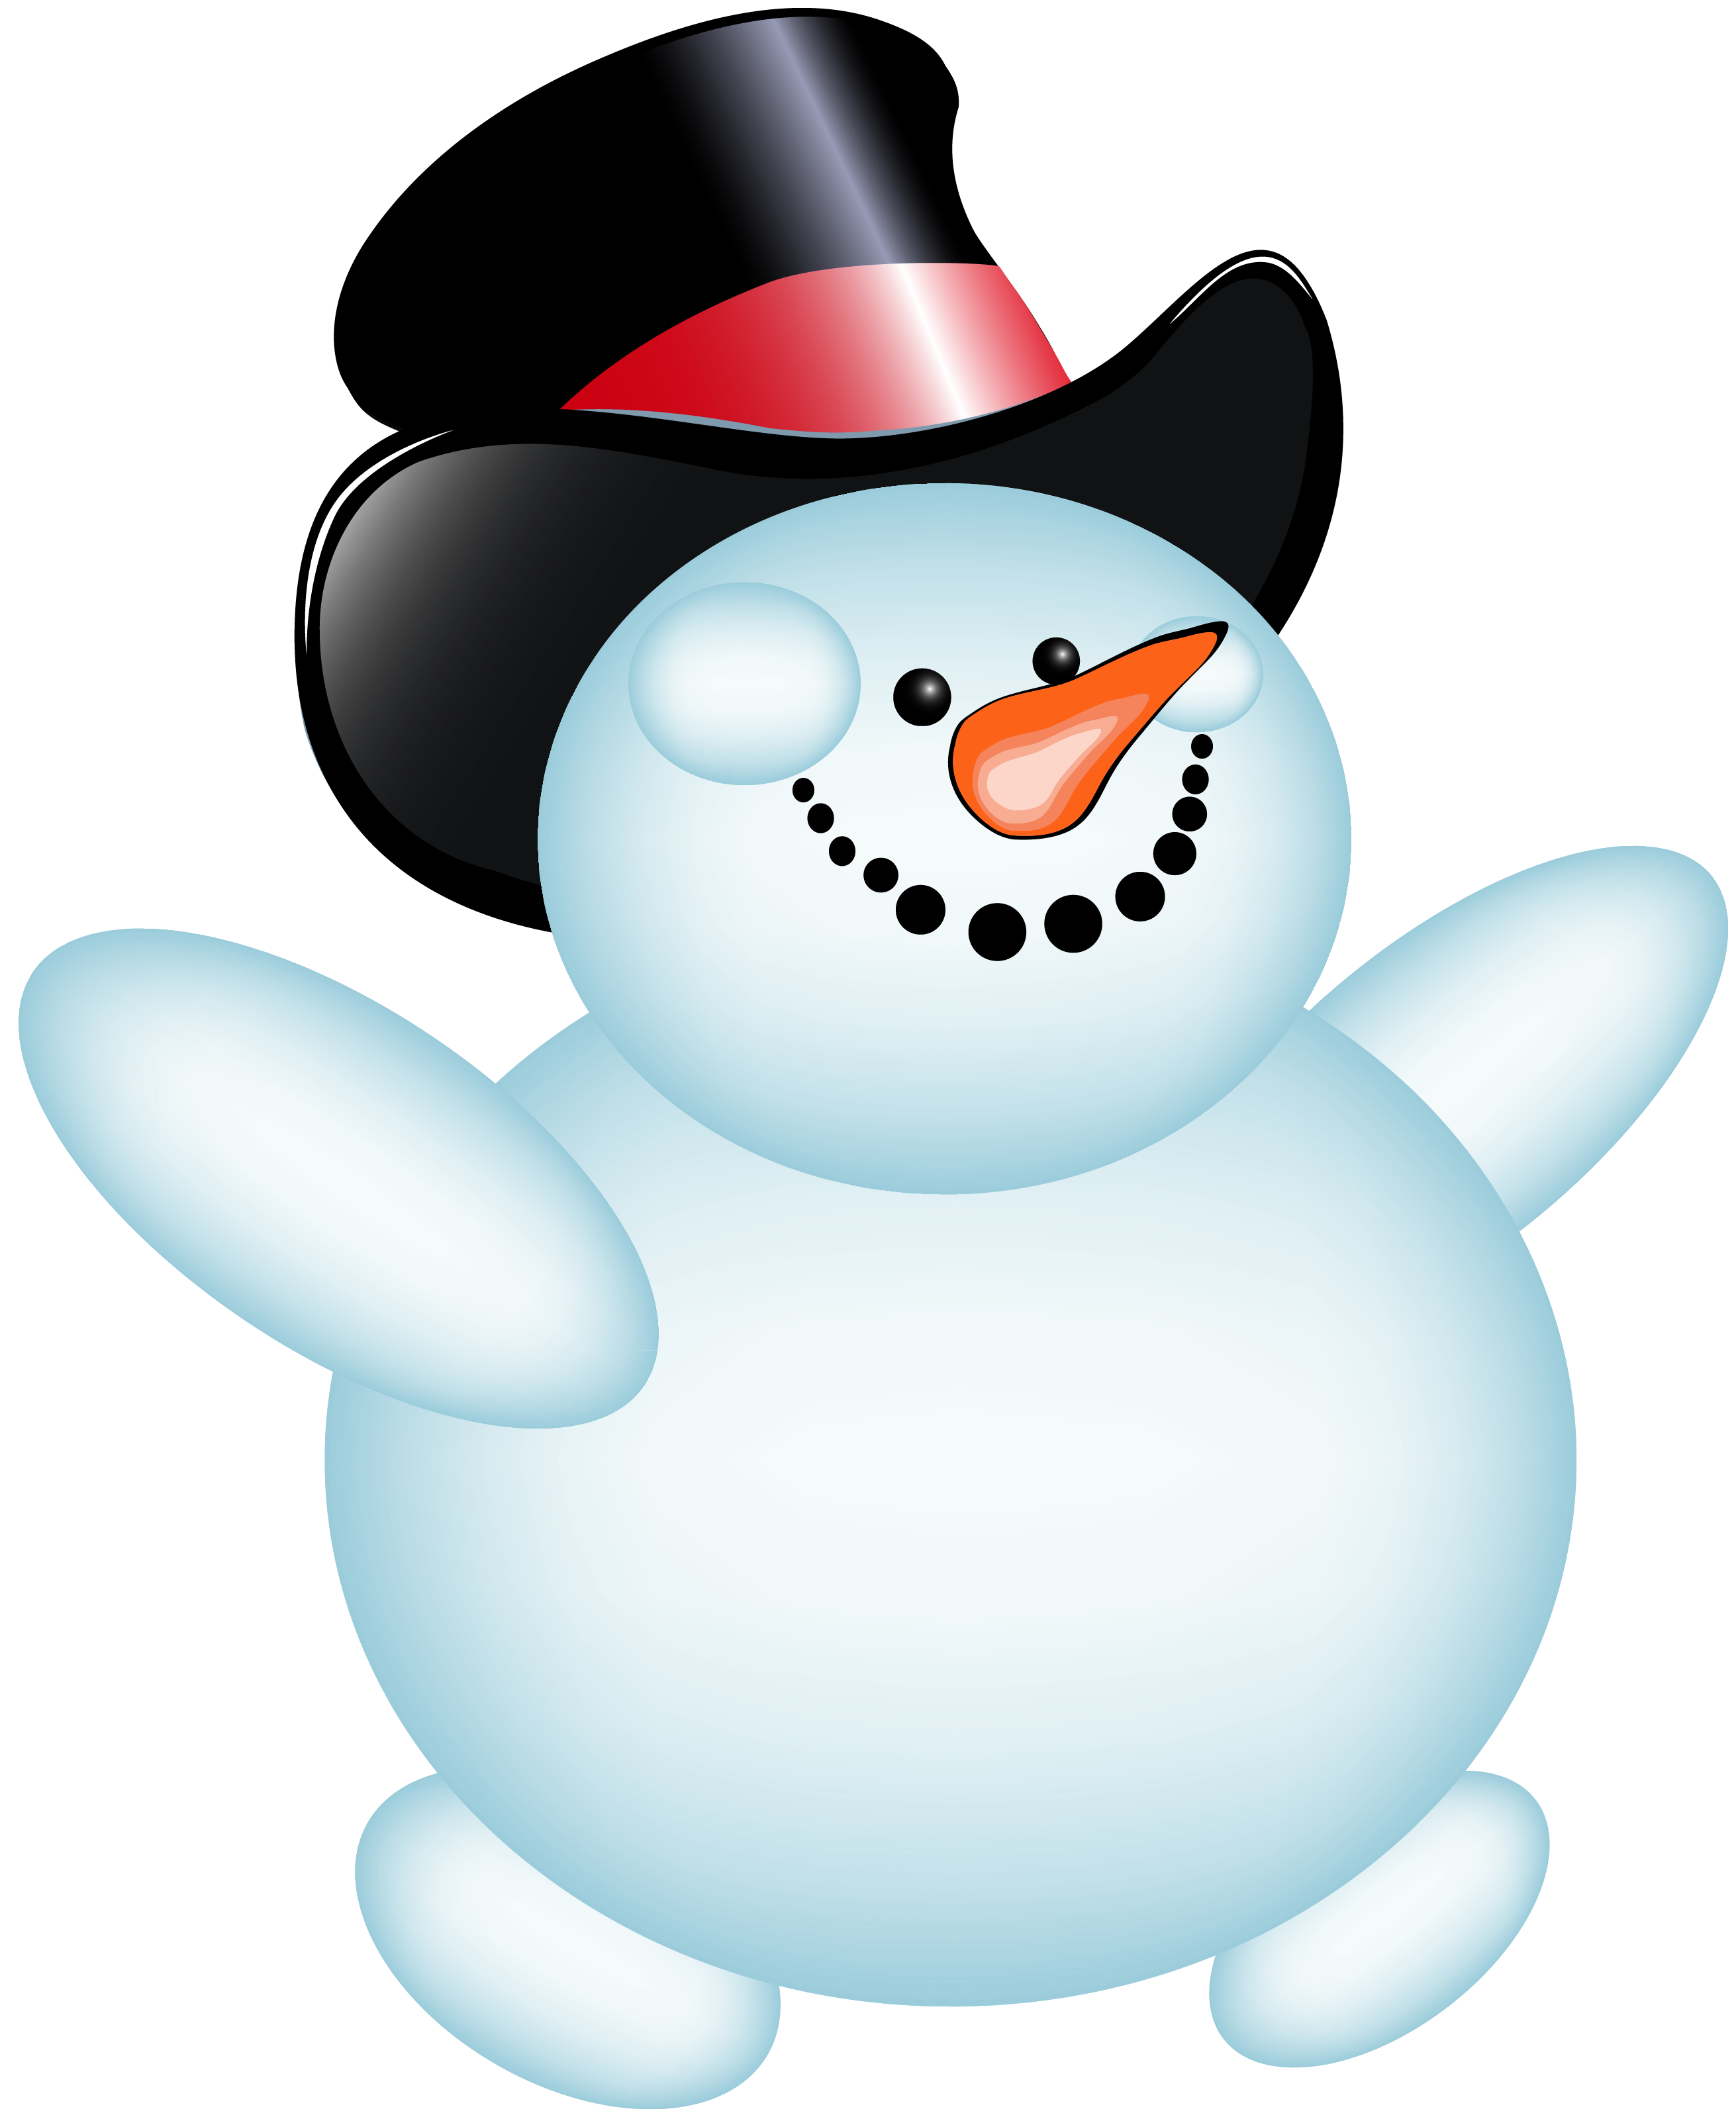 Winter clipart february. Christmas snowman at getdrawings